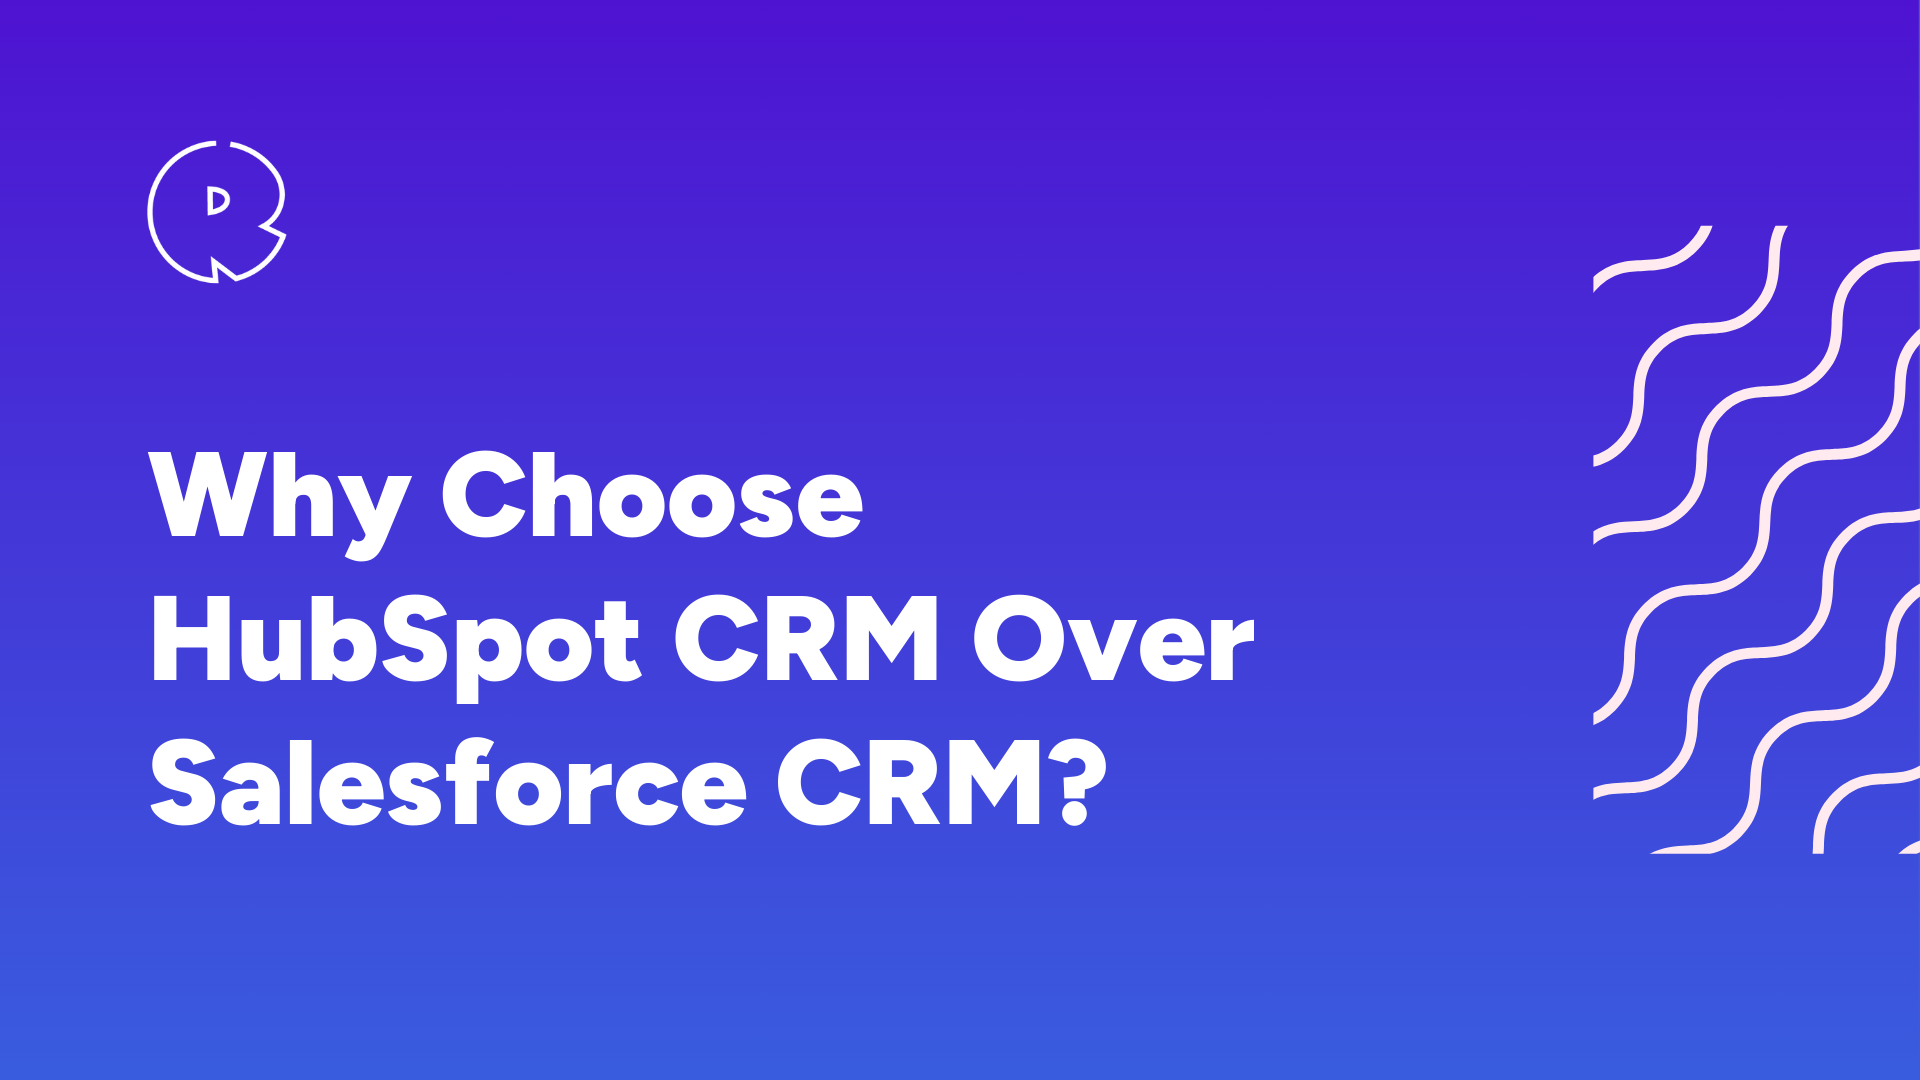 Why Choose HubSpot CRM Over Salesforce CRM?